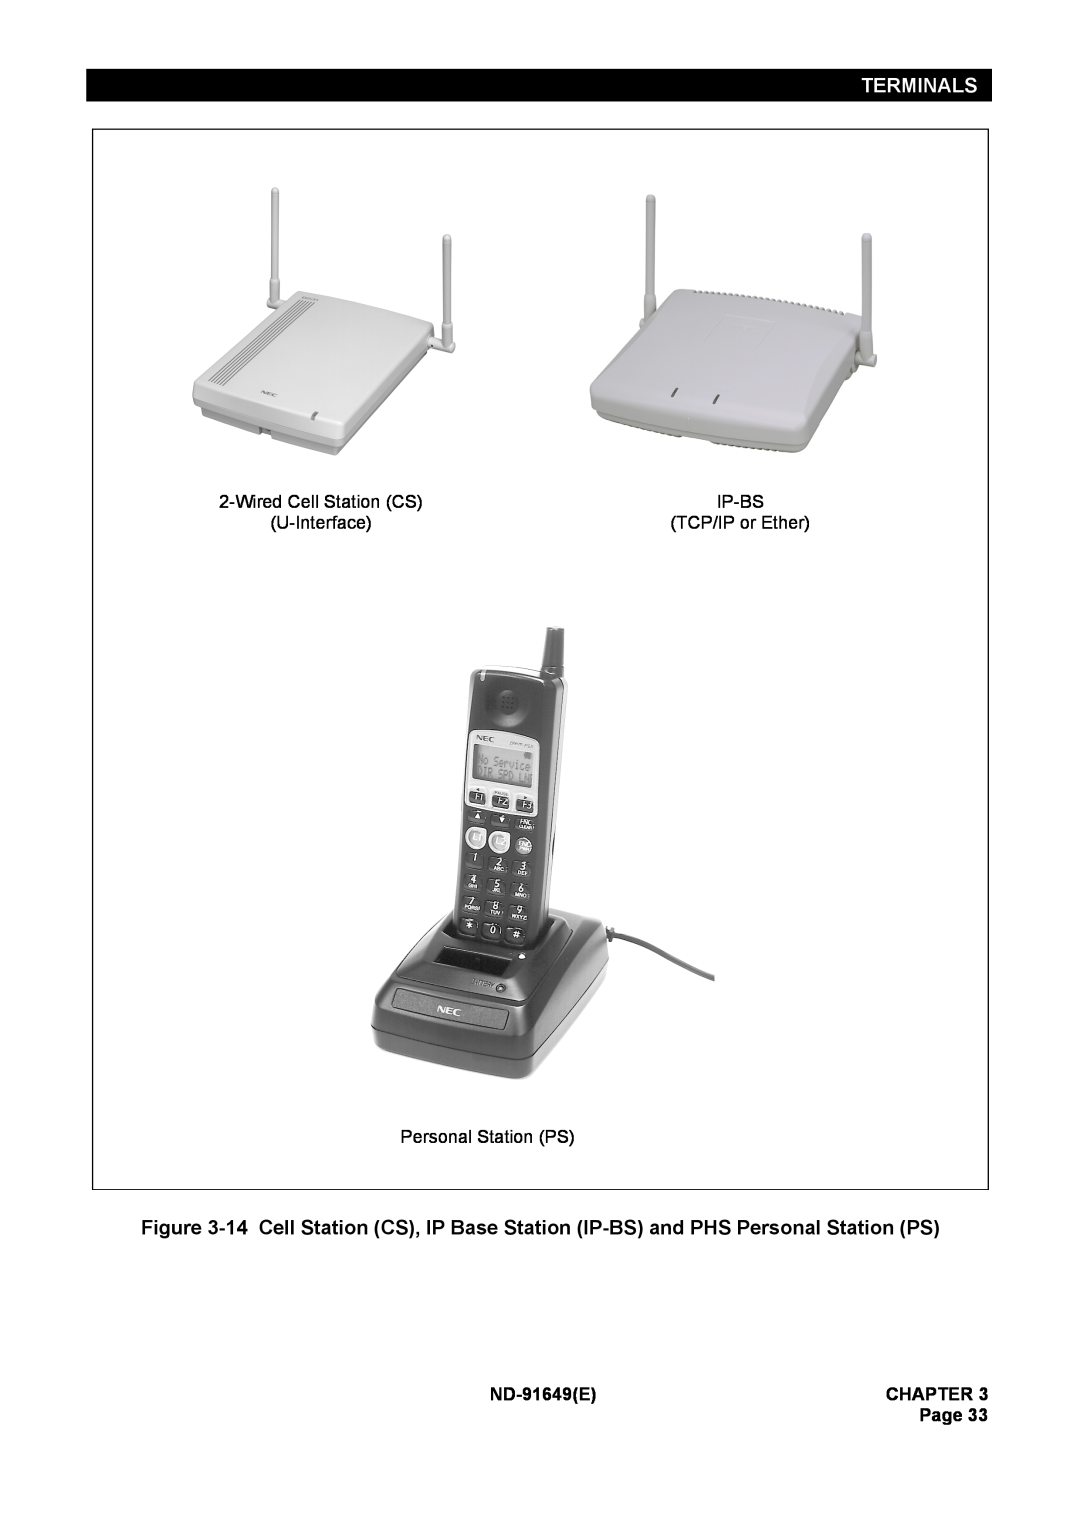 NEC Terminals, Wired Cell Station CS, Ip-Bs, U-Interface, TCP/IP or Ether, Personal Station PS, ND-91649E, Chapter 